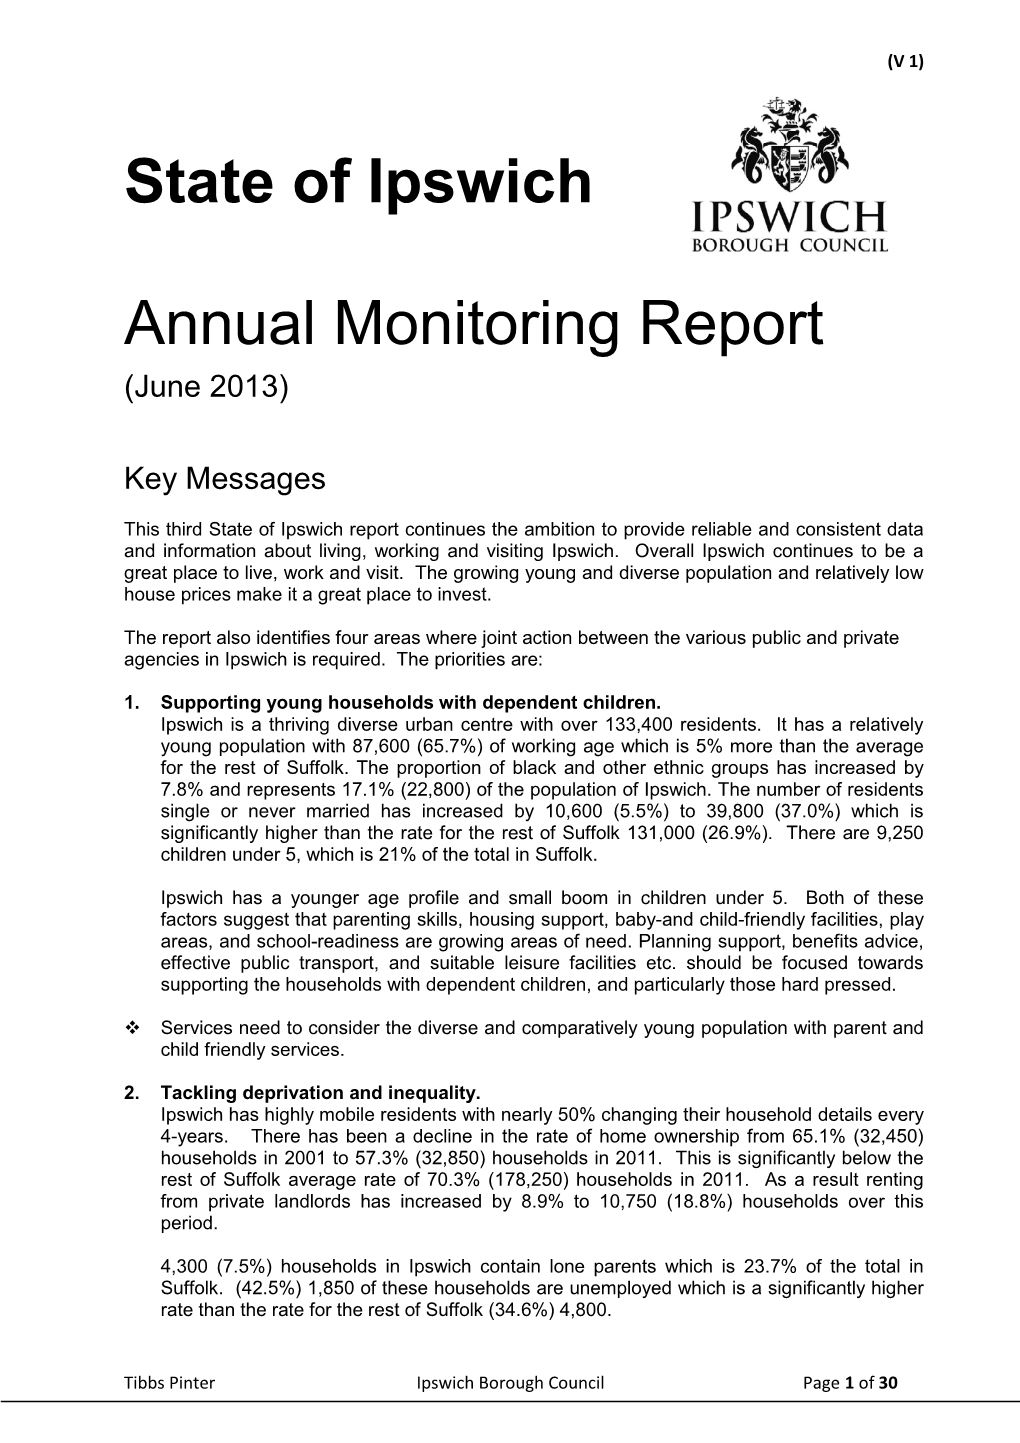 State of Ipswich Annual Monitoring Report